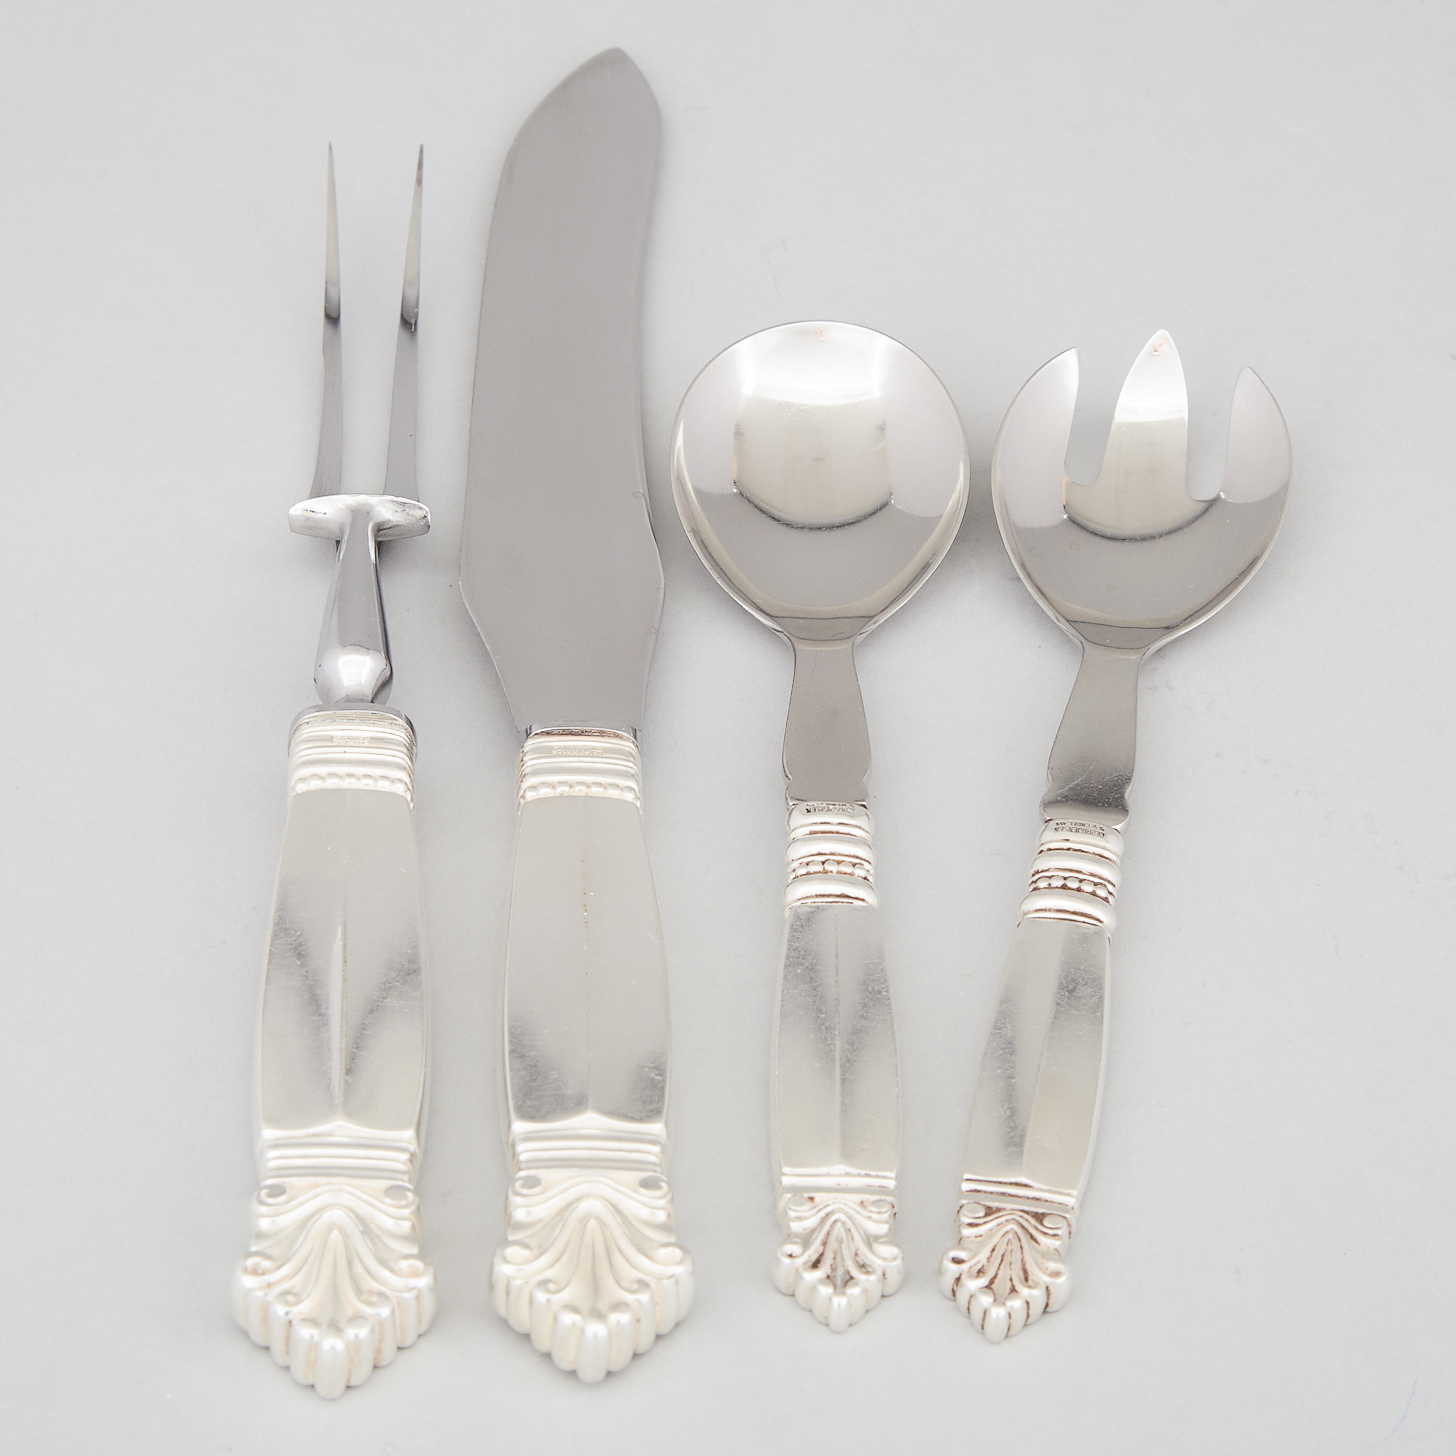 Pair of Danish Silver ‘Acanthus’ Pattern Carving Knife and Fork and a Pair of Salad Servers, Johan Rohde for Georg Jensen, Copenhagen, 20th century